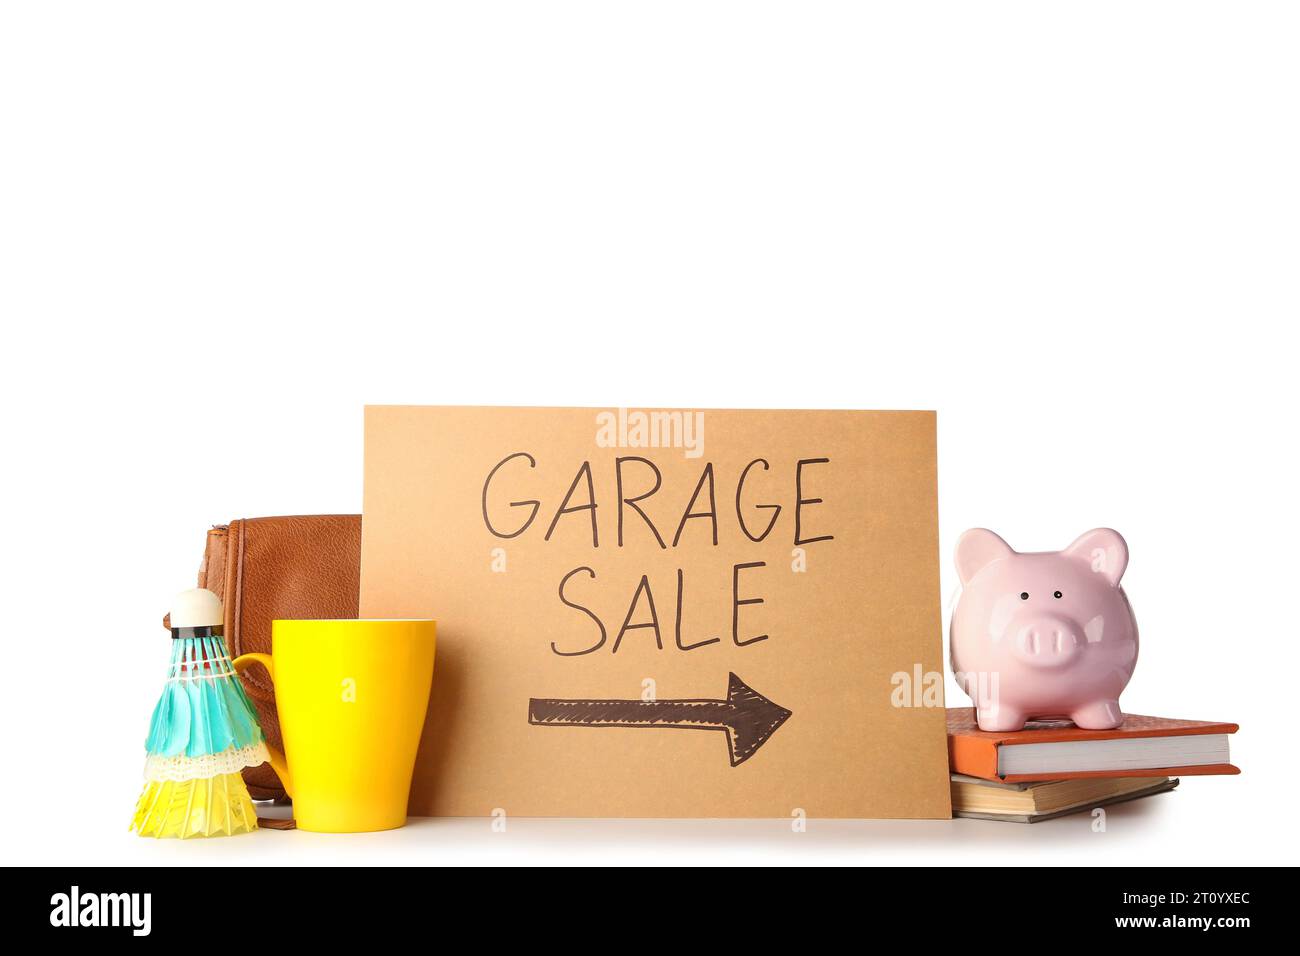 Unwanted stuff and cardboard with text GARAGE SALE isolated on white background Stock Photo